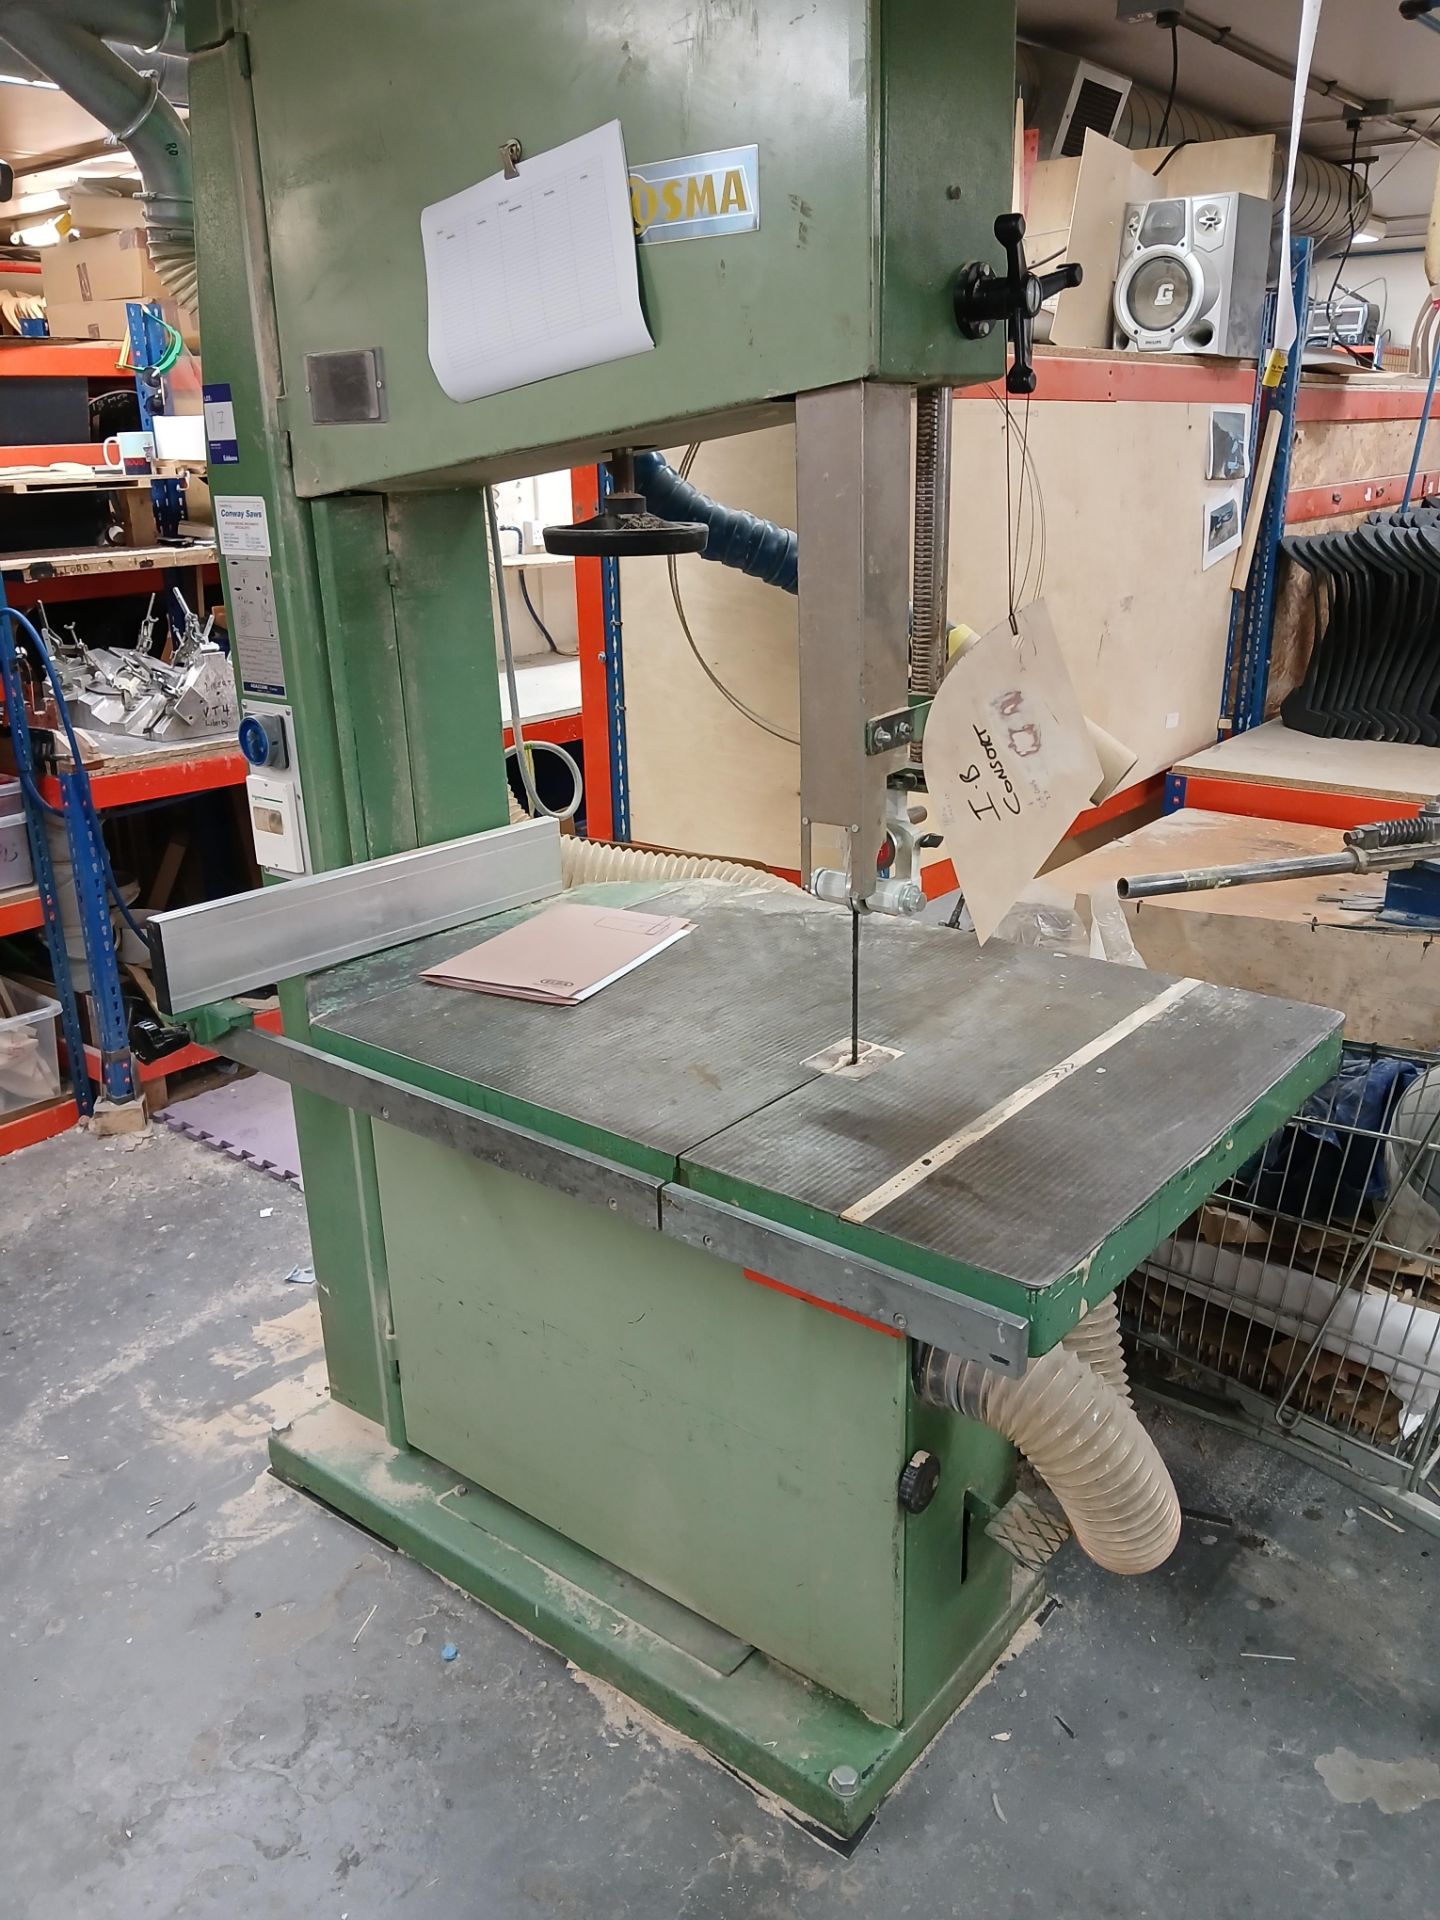 Osma model 800 bandsaw Serial number 01048 (1993) C.75cm throat – Ducting excluded, A Risk - Image 2 of 5